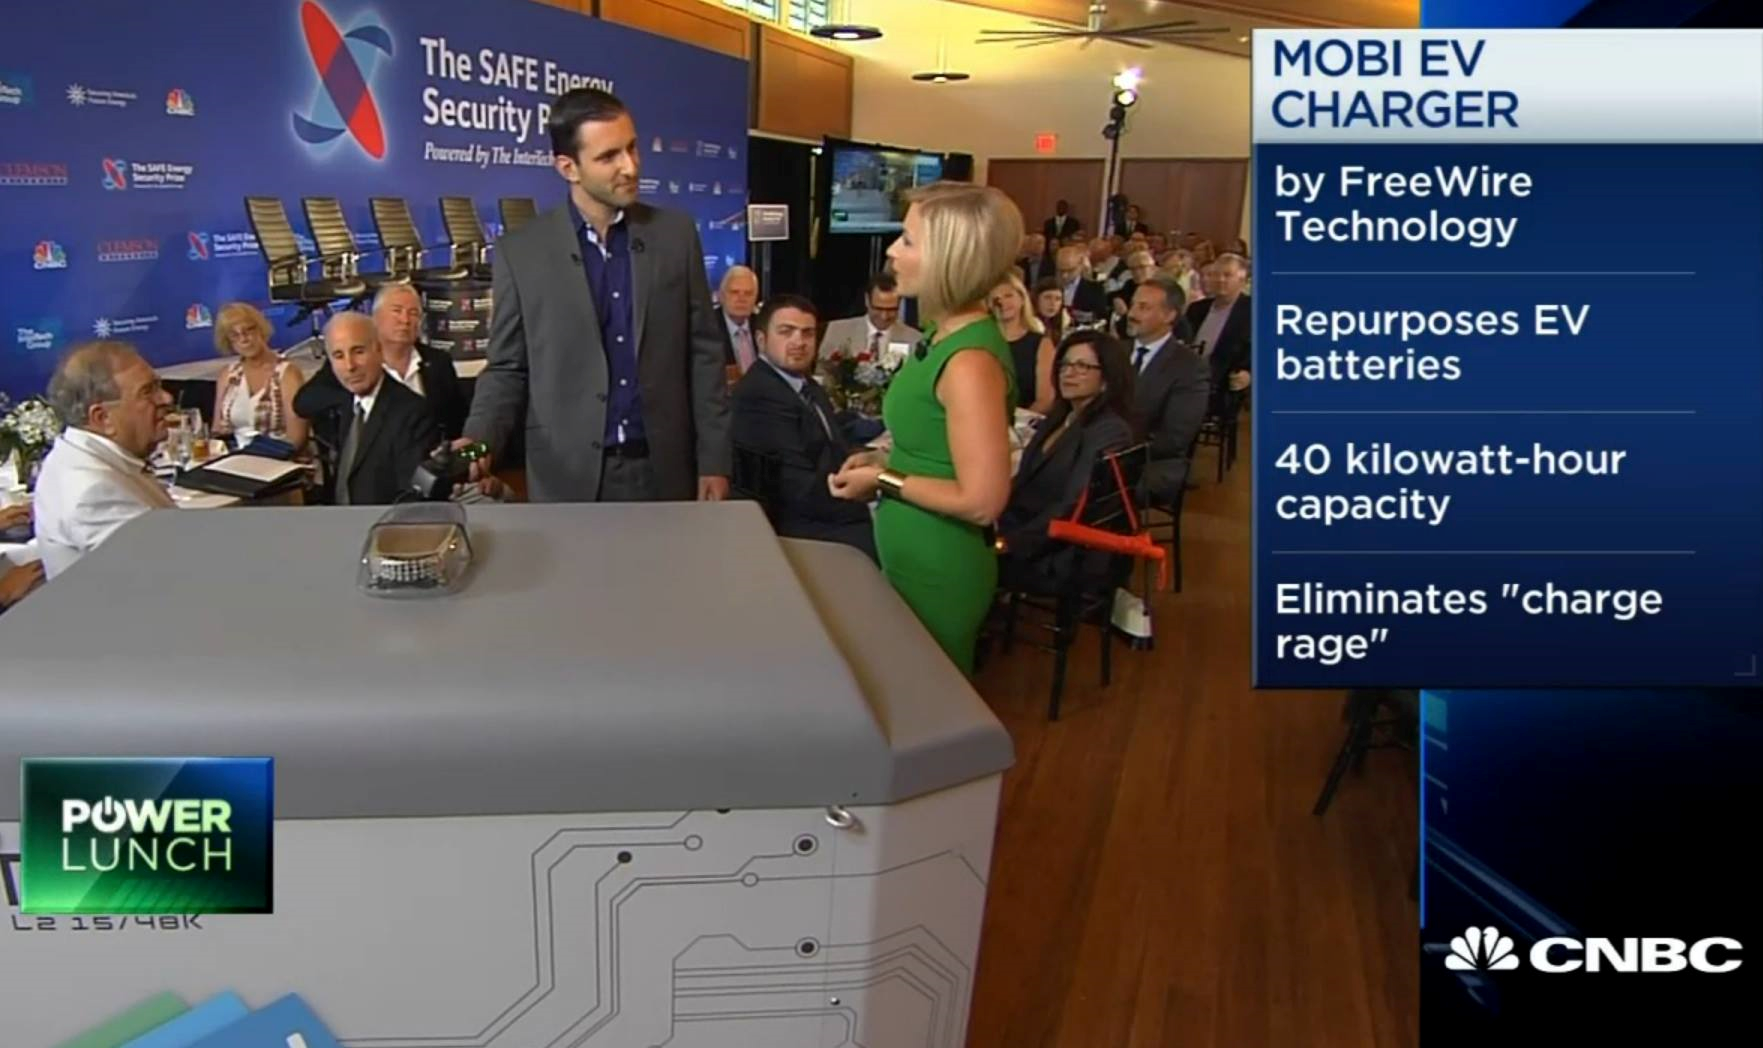 FreeWire Mobi EV Charger featured on CNBC